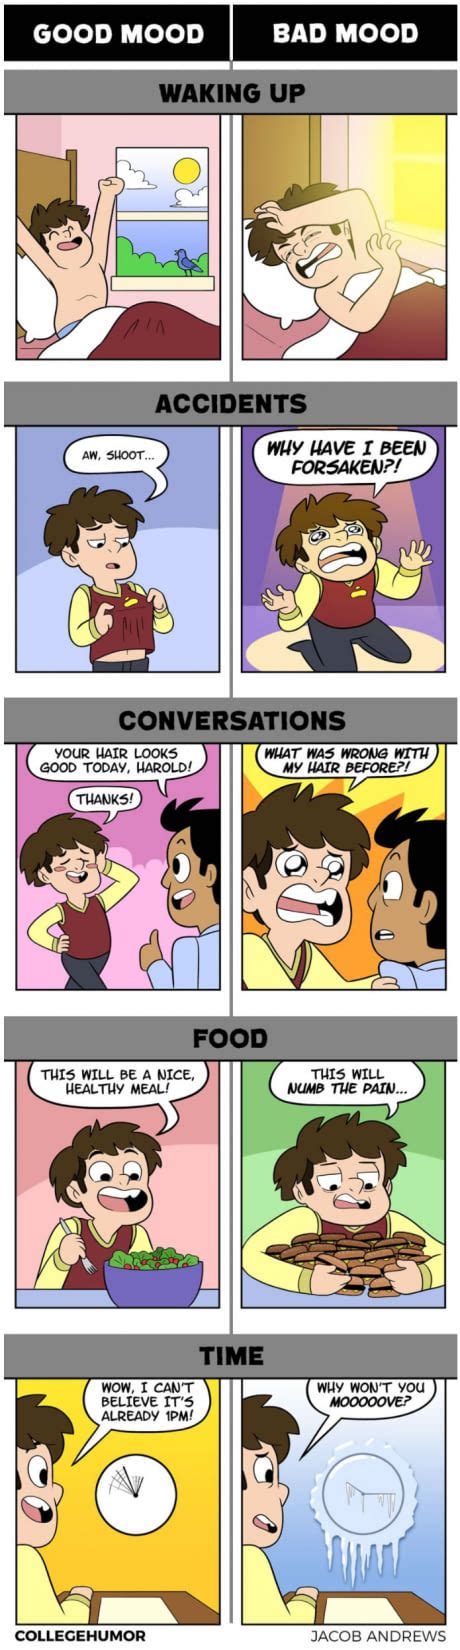 The Comic Strip Shows How People Are Talking To Each Other